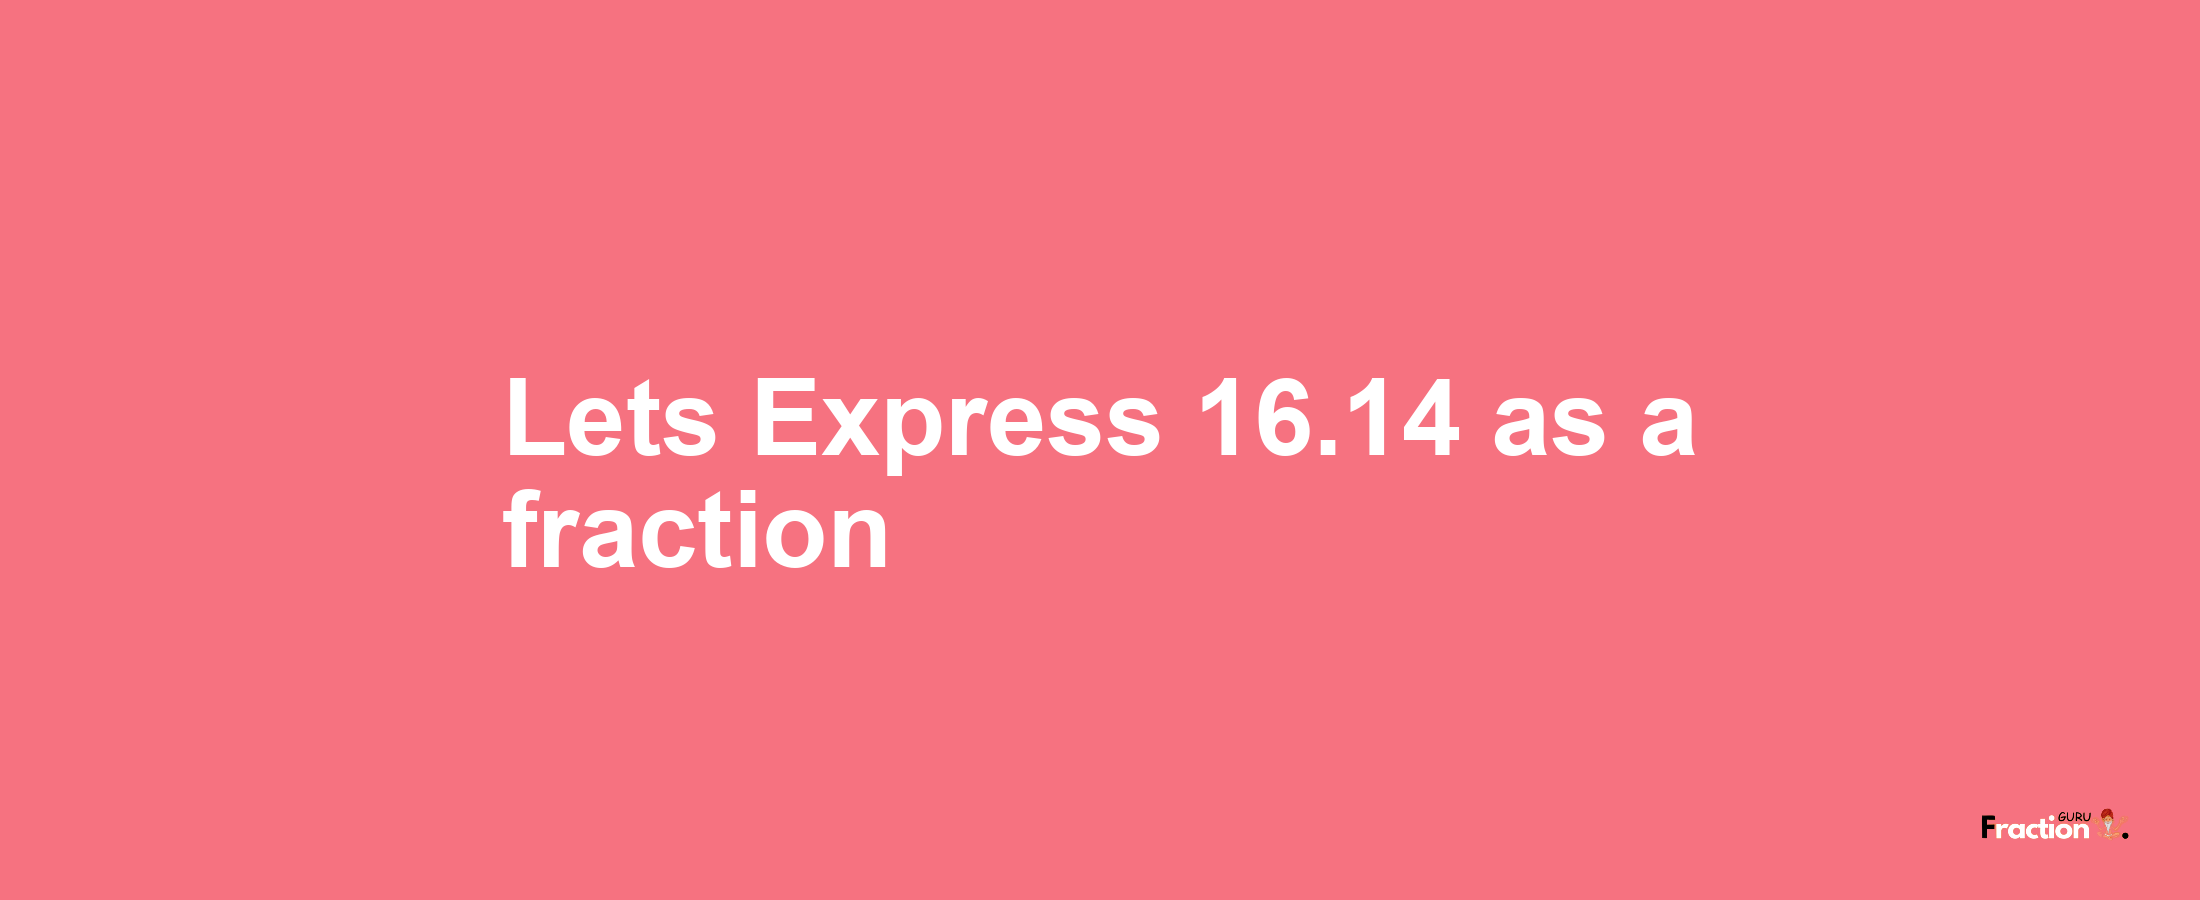 Lets Express 16.14 as afraction